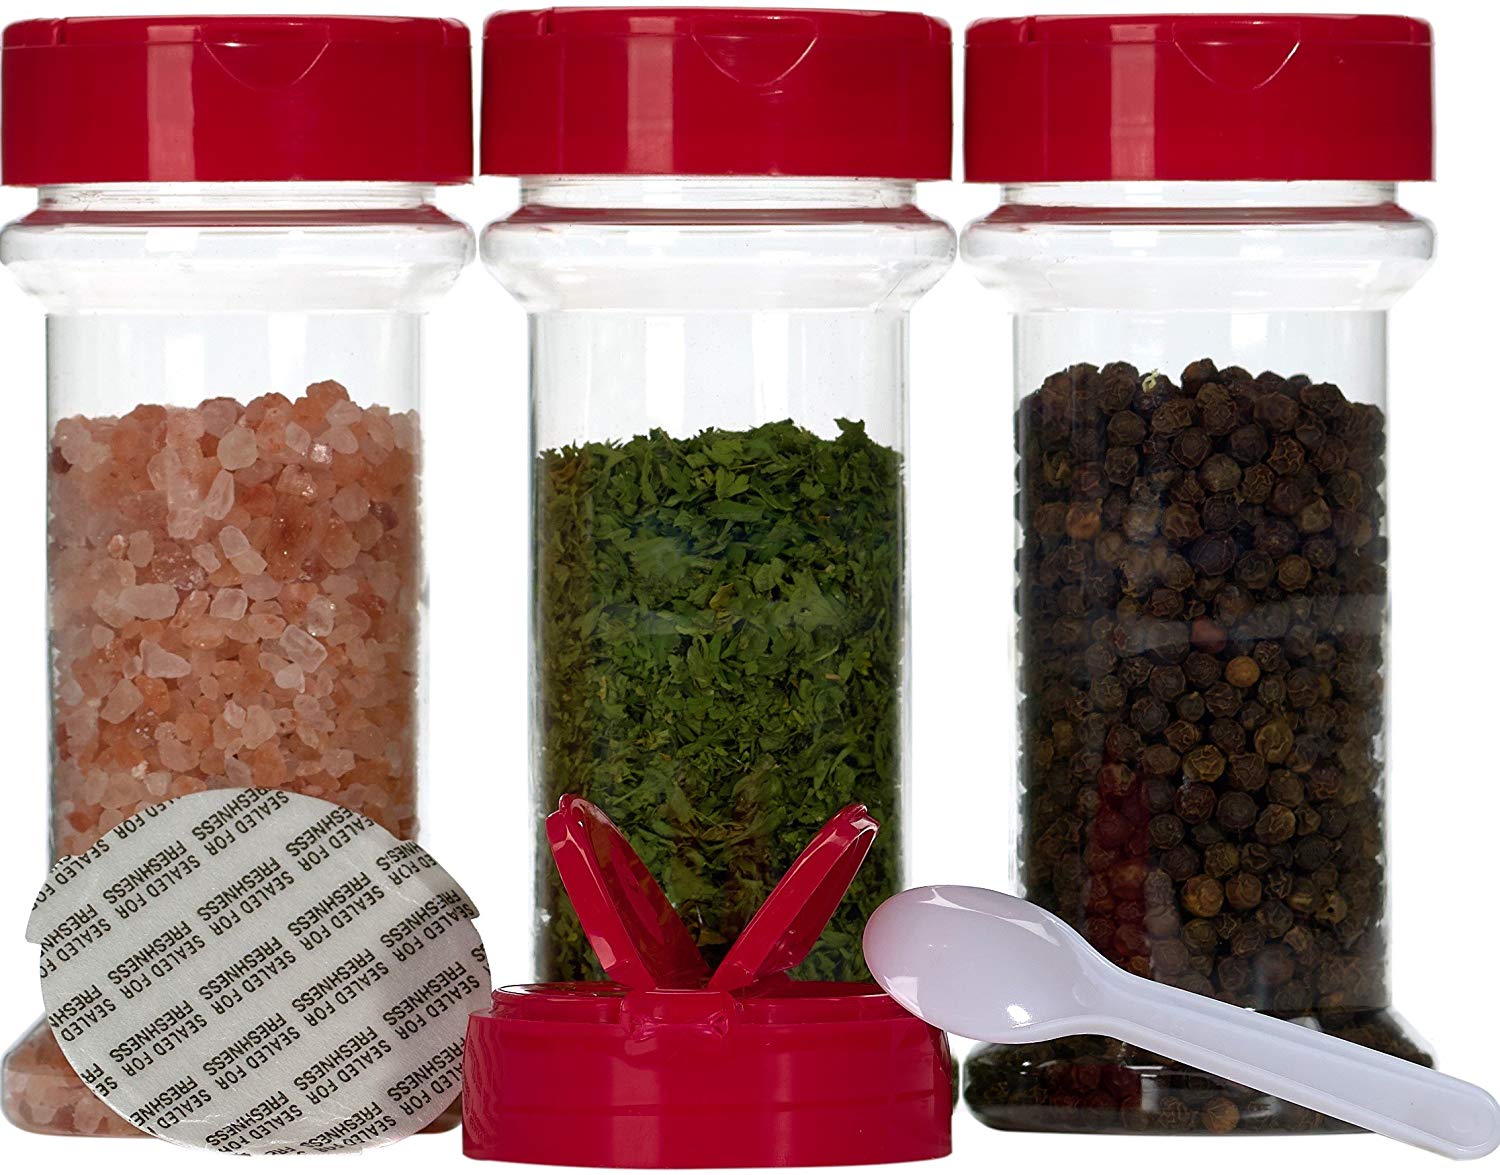 Spice Containers 10 sets - 7 oz. clear plastic pet spice jars storage container bottles with red sifter spoon caps - 10 bottles with caps - plus 2 mini spoons